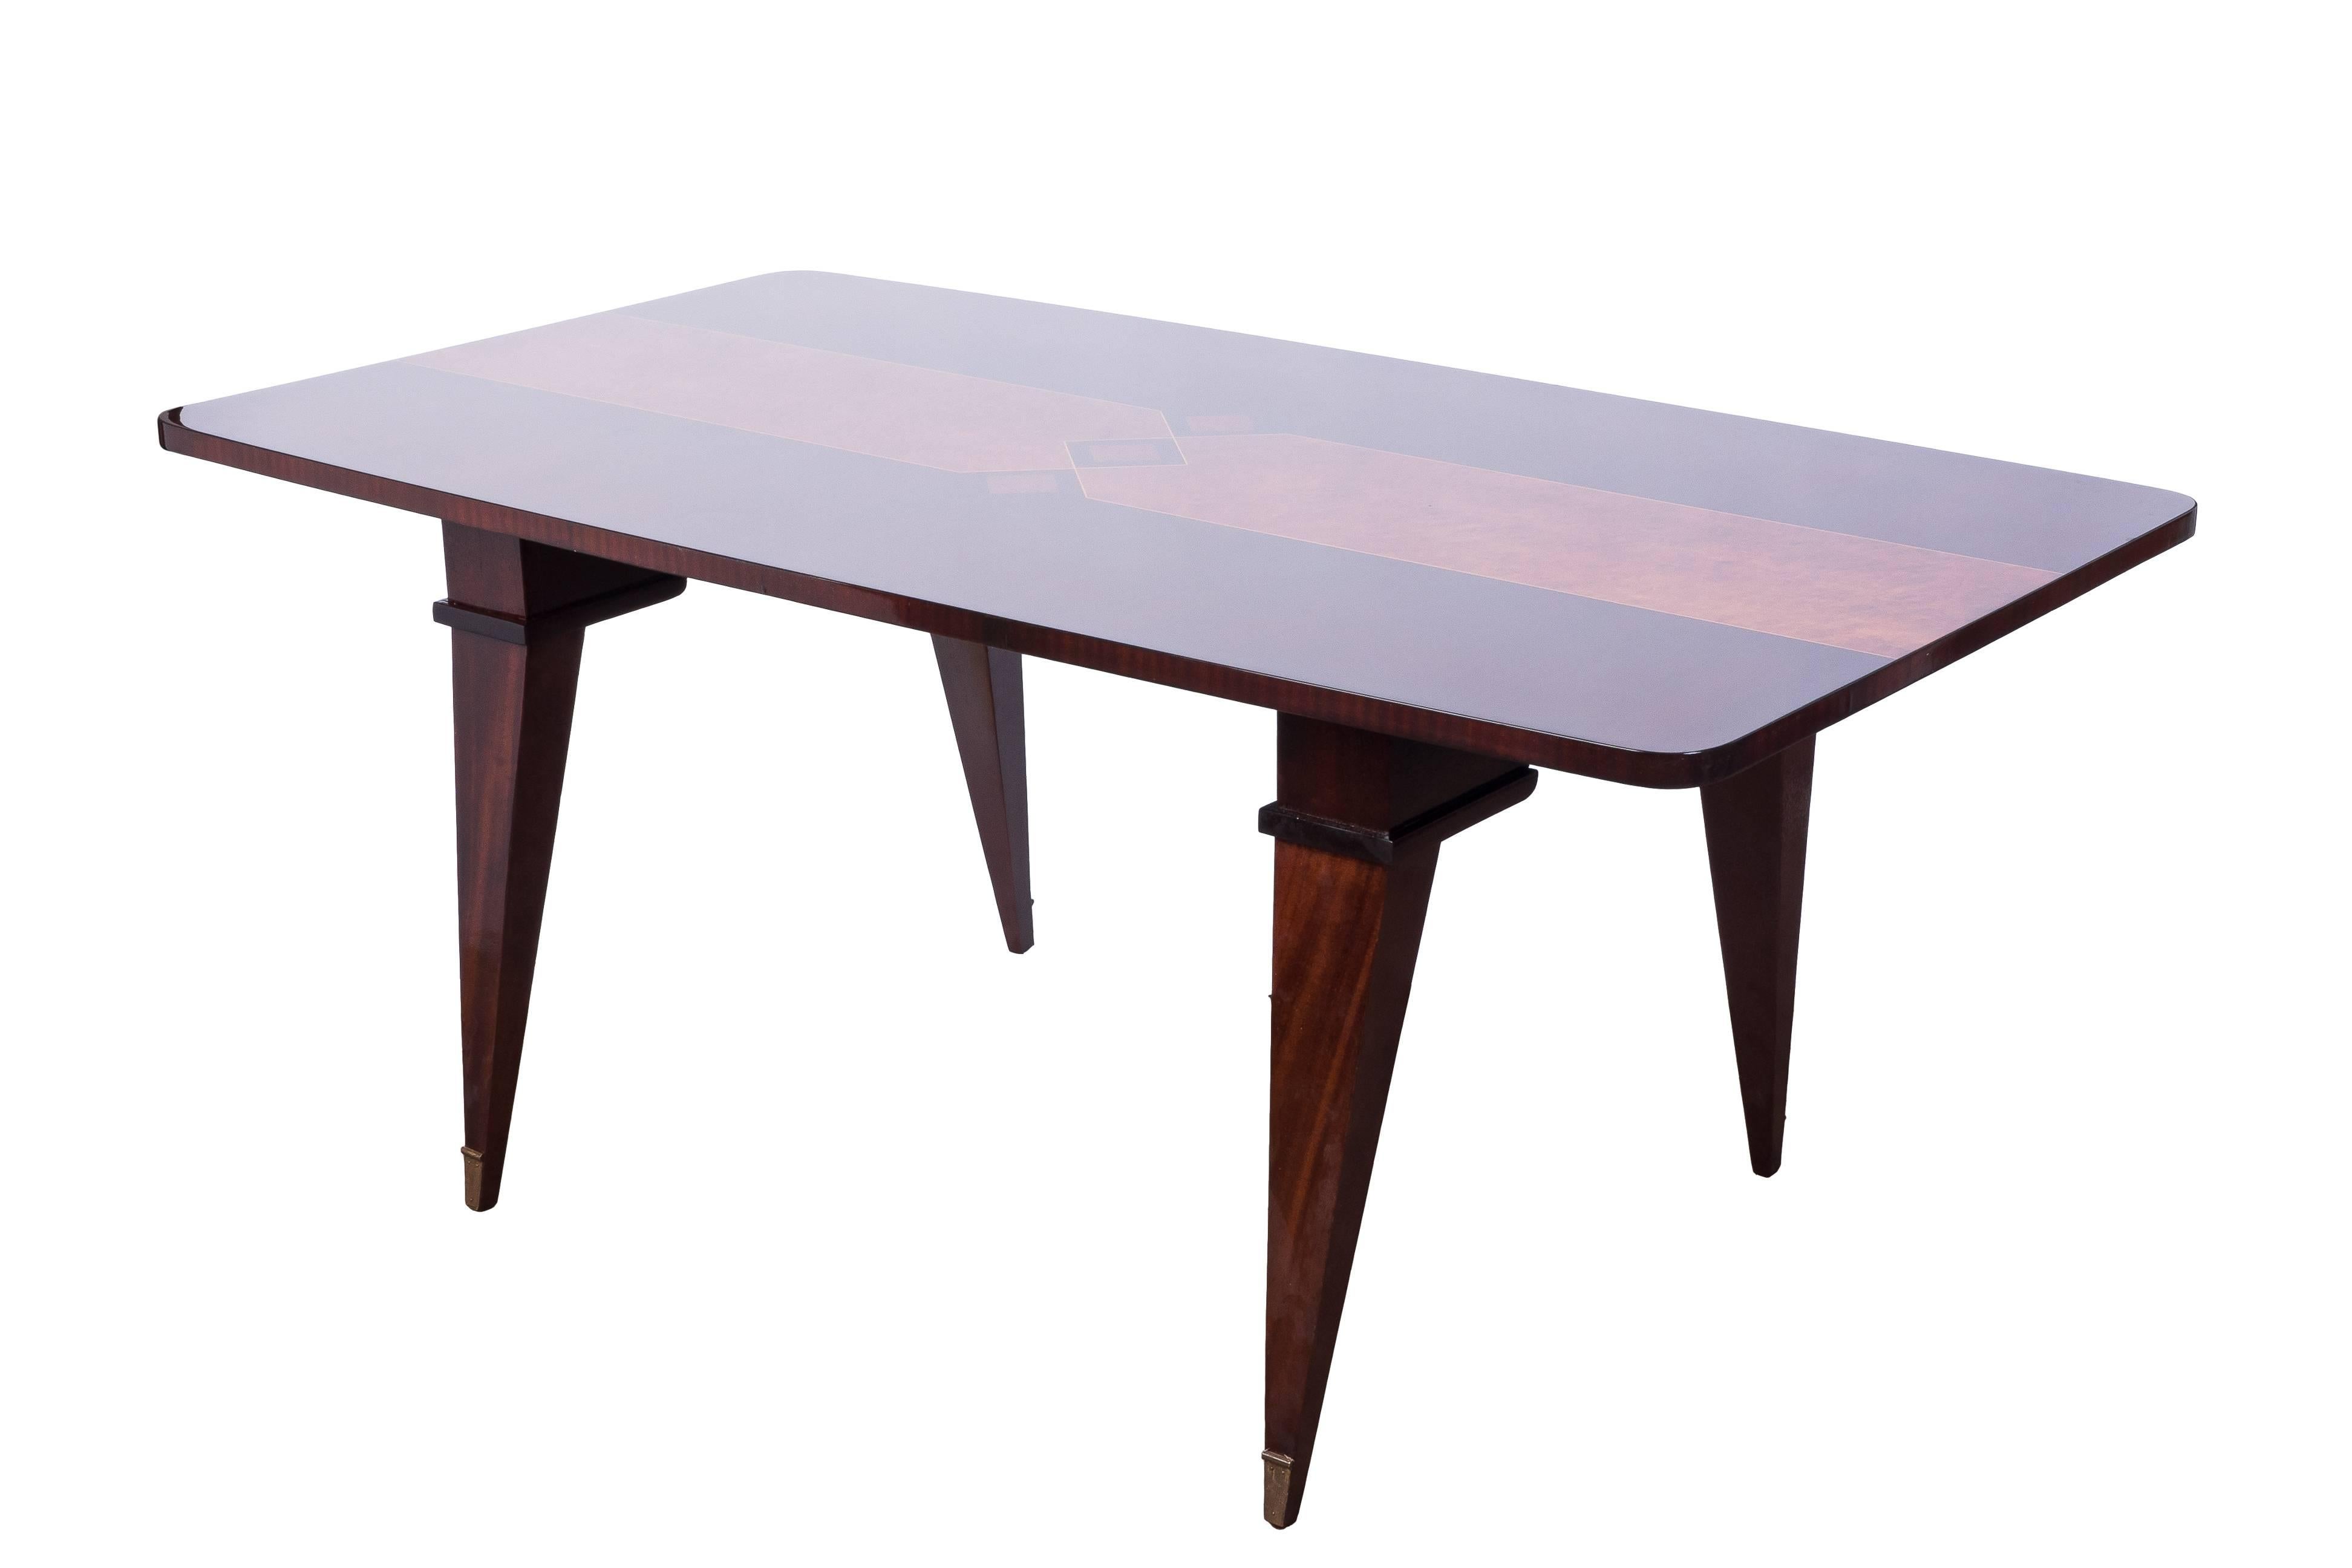 Gorgeous Art Deco dining table with a solid mahogany base and top in solid mahogany veneered in walnut and burl creating a luxe deco design.